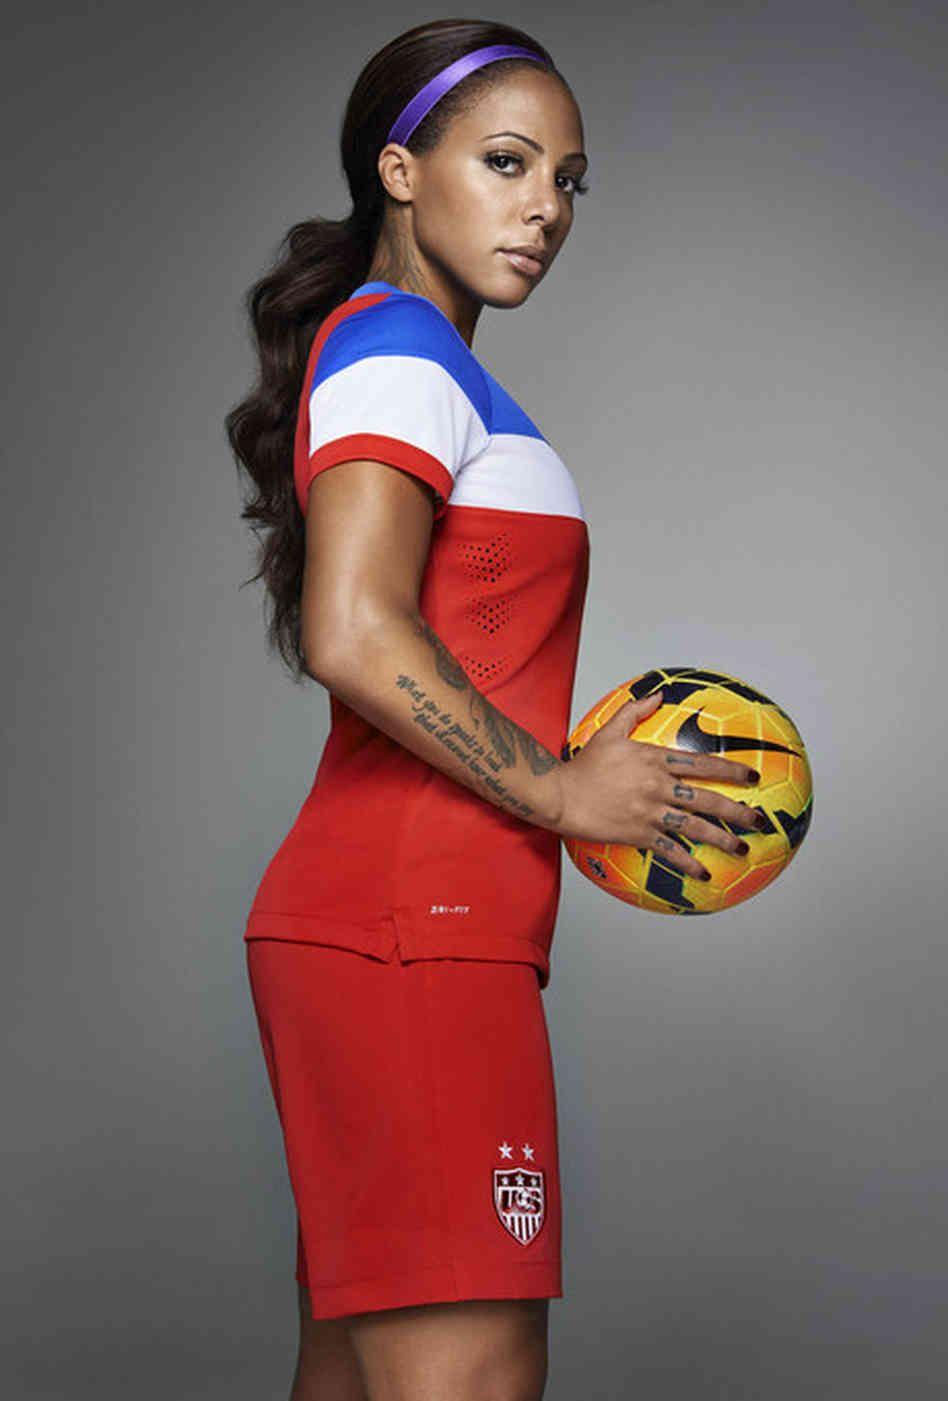 Too French? Nike Rolls Out U.S. World Cup Soccer Uniforms. Soccer